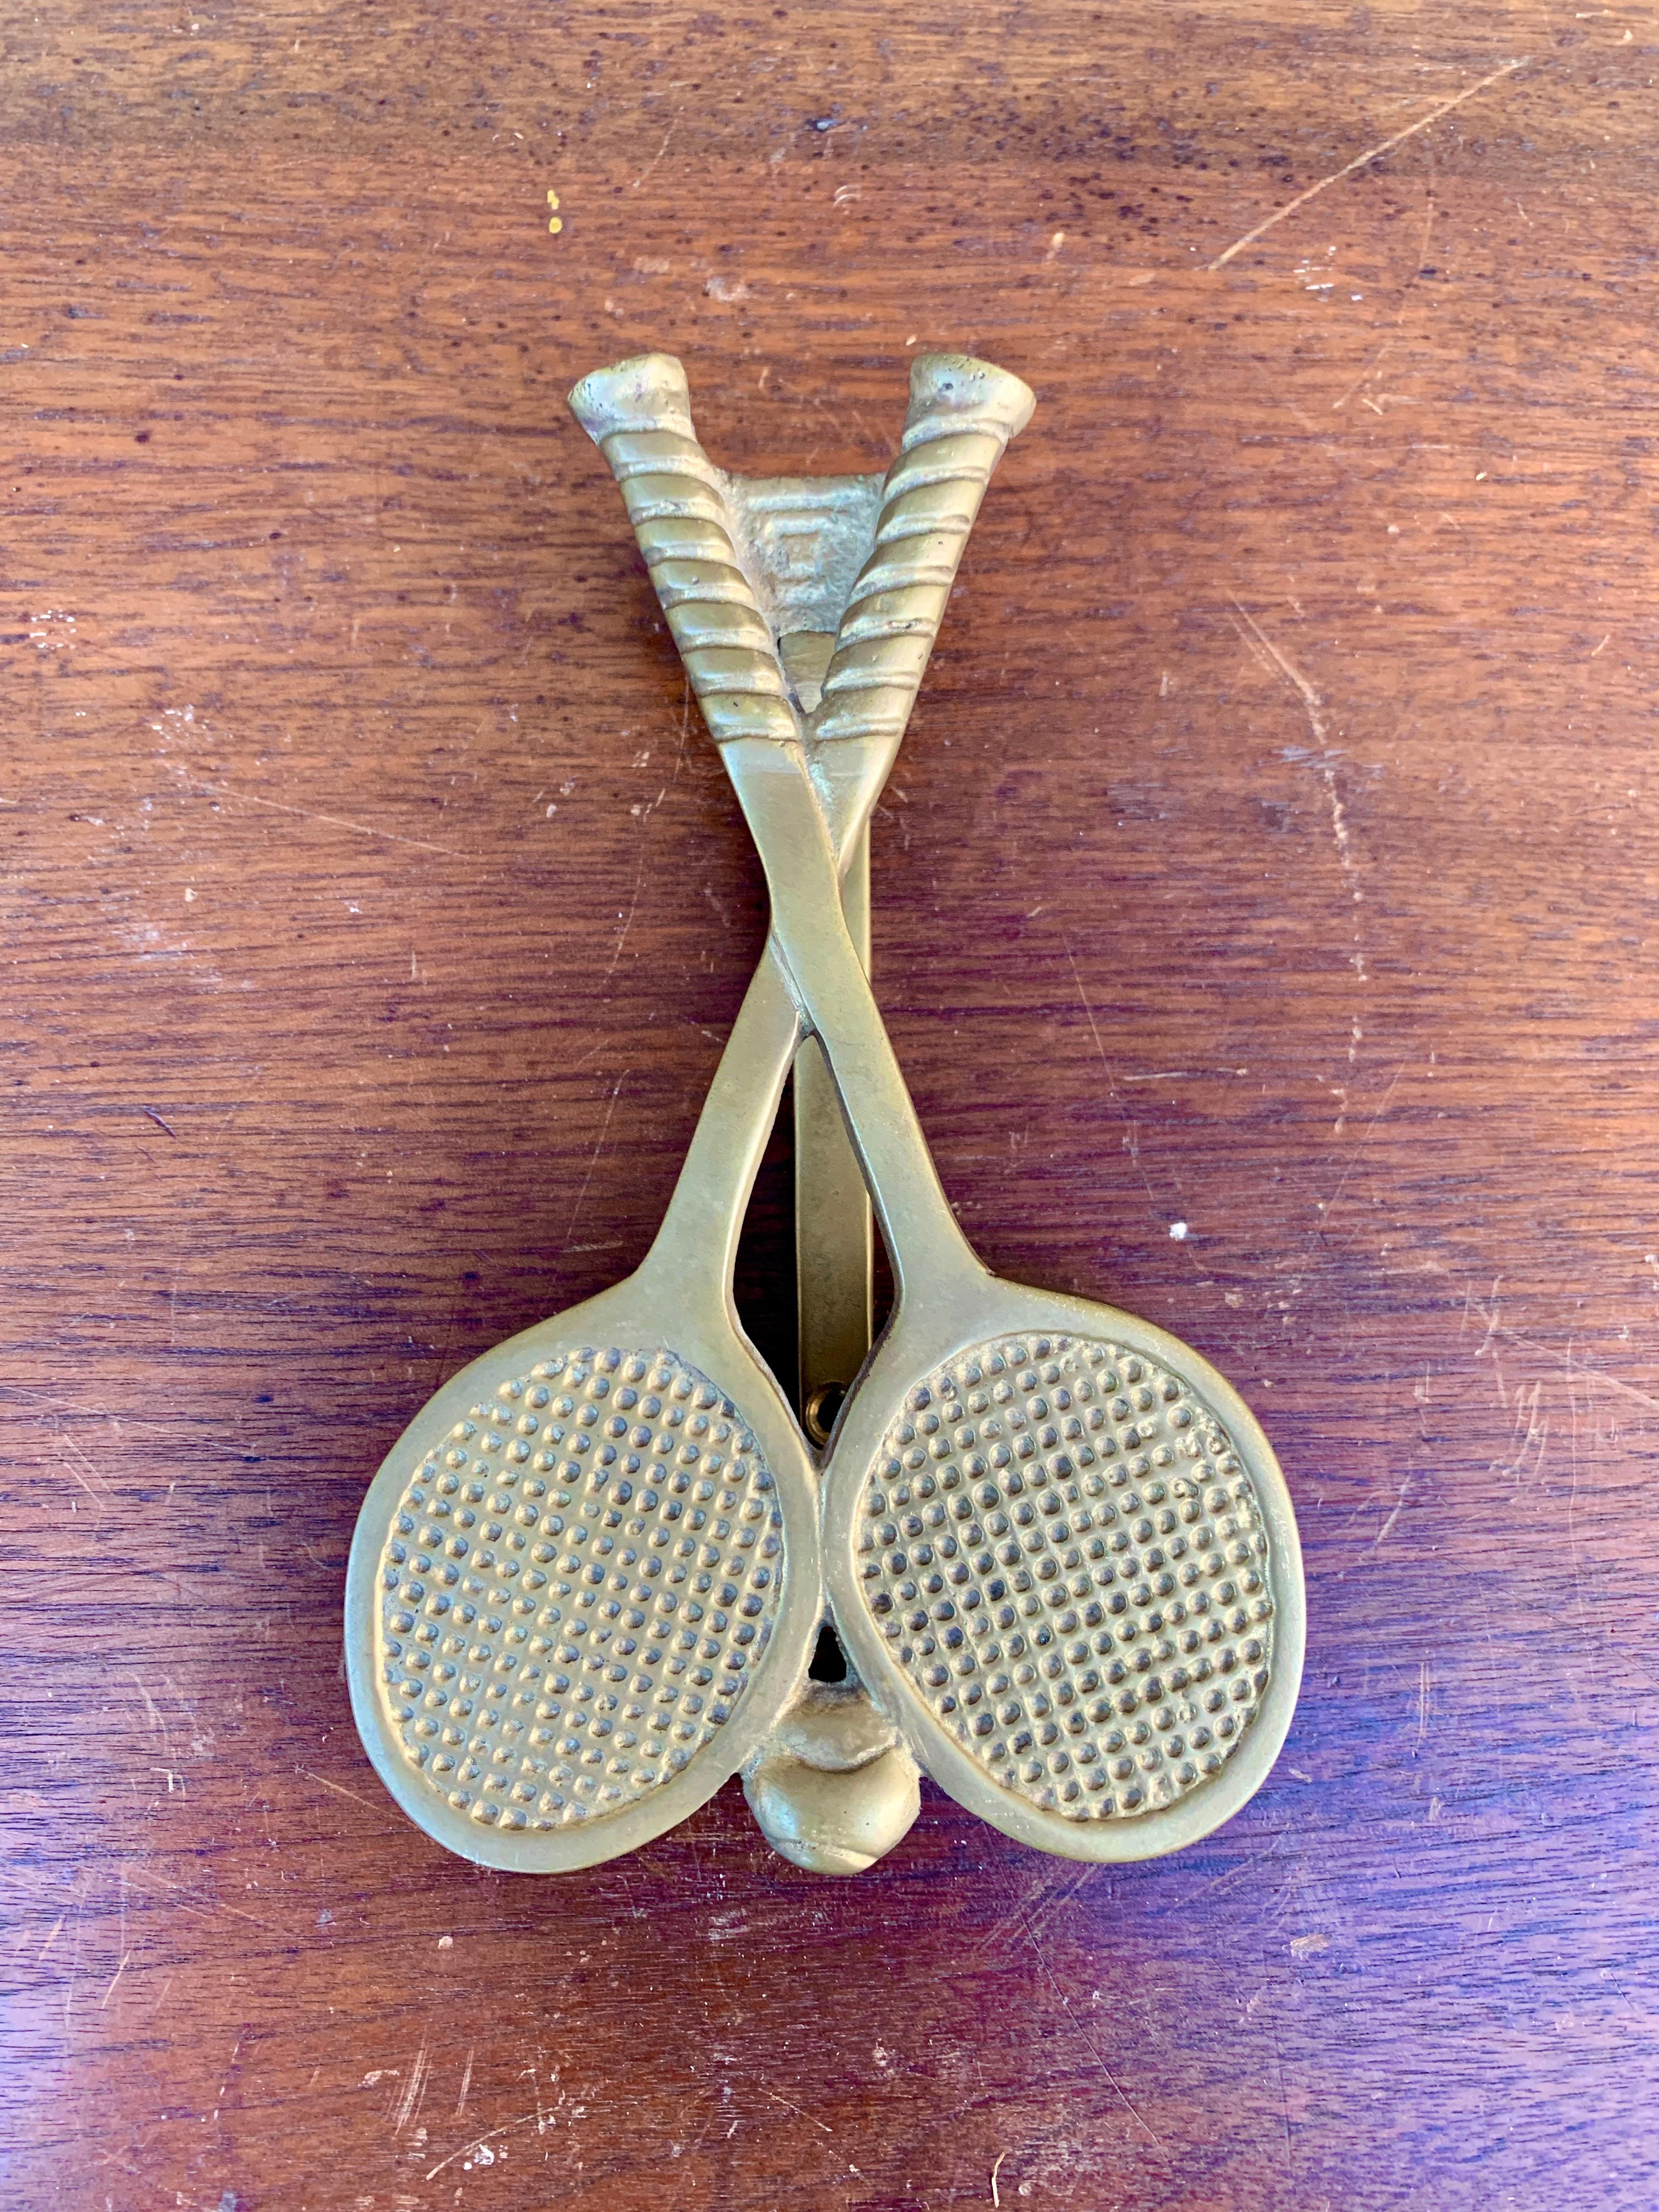 A beautiful cast brass door knocker in the form of two tennis rackets and a tennis ball.

USA, Mid-20th Century

Measures: 3.75